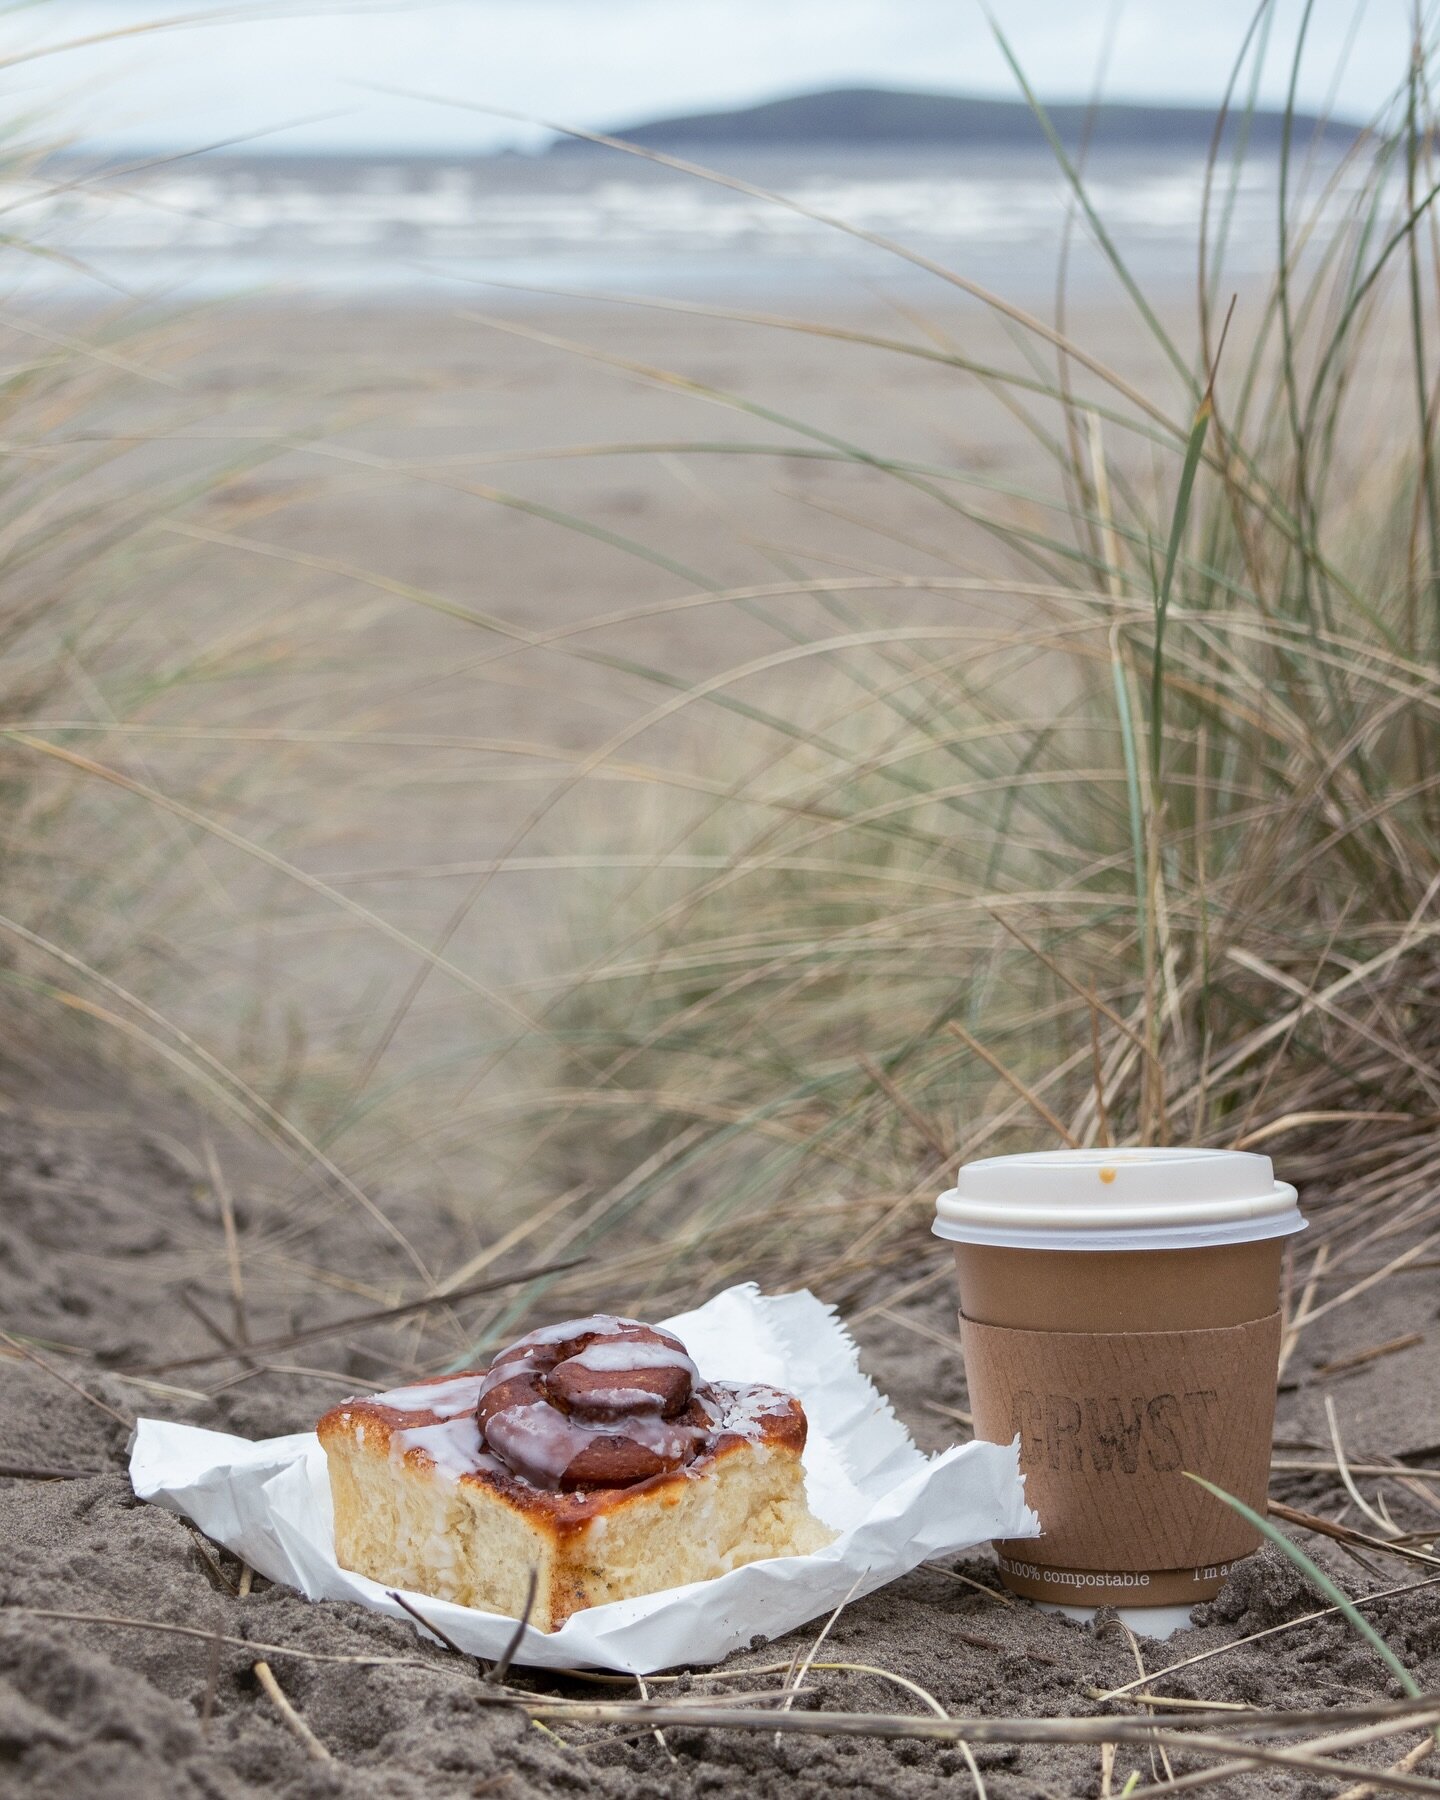 Coffee and cinnamon buns by the sea anyone? 🌊

@crwst_poppit is one of the fantastic spots in our new Pembrokeshire Coast guide, curated, written and photographed by @brookaurora_ ✨

The guide features 4 walks as well as places to visit, eat drink a